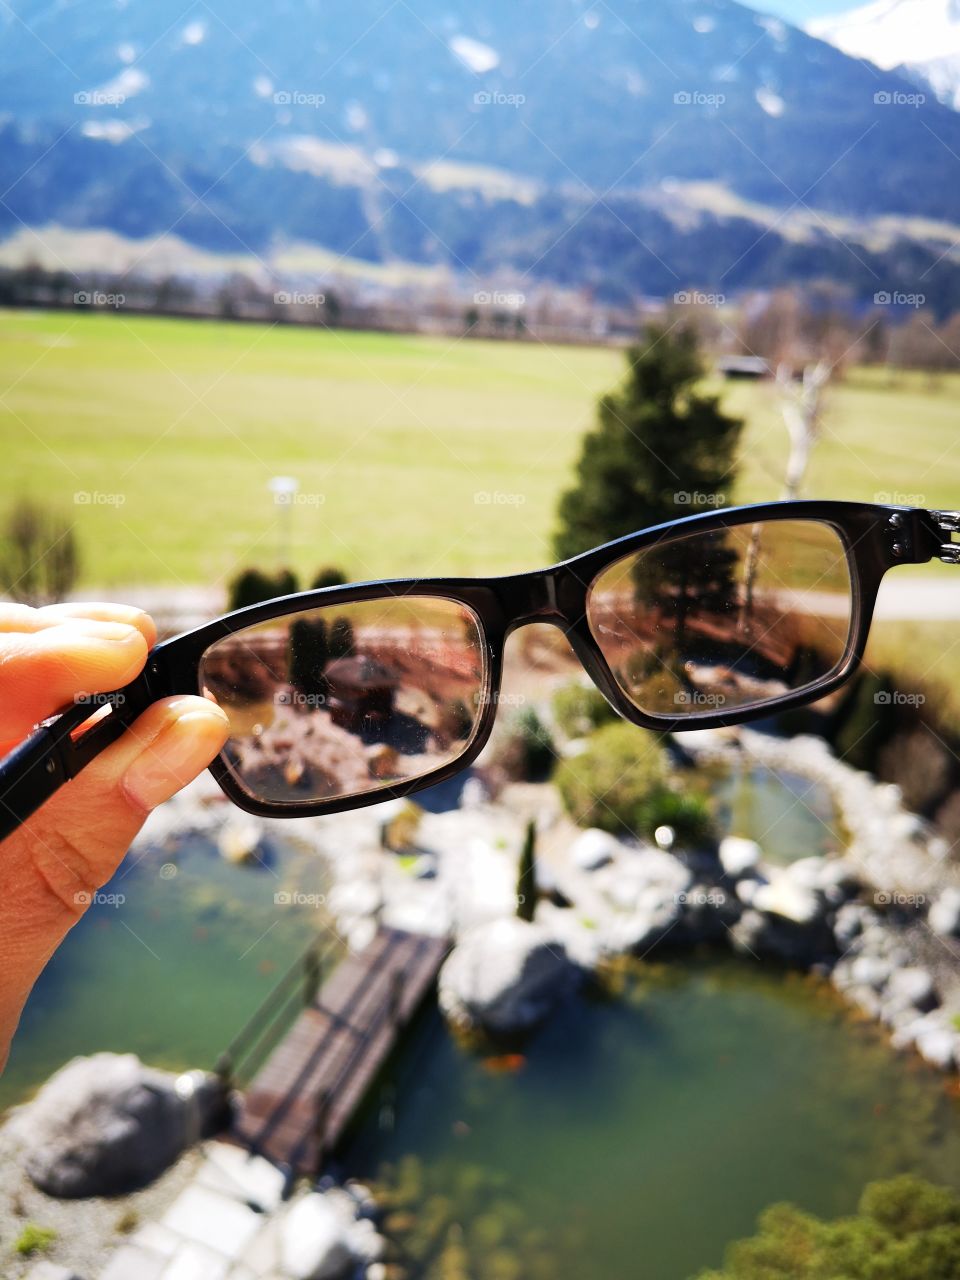 See the world through the glasses.